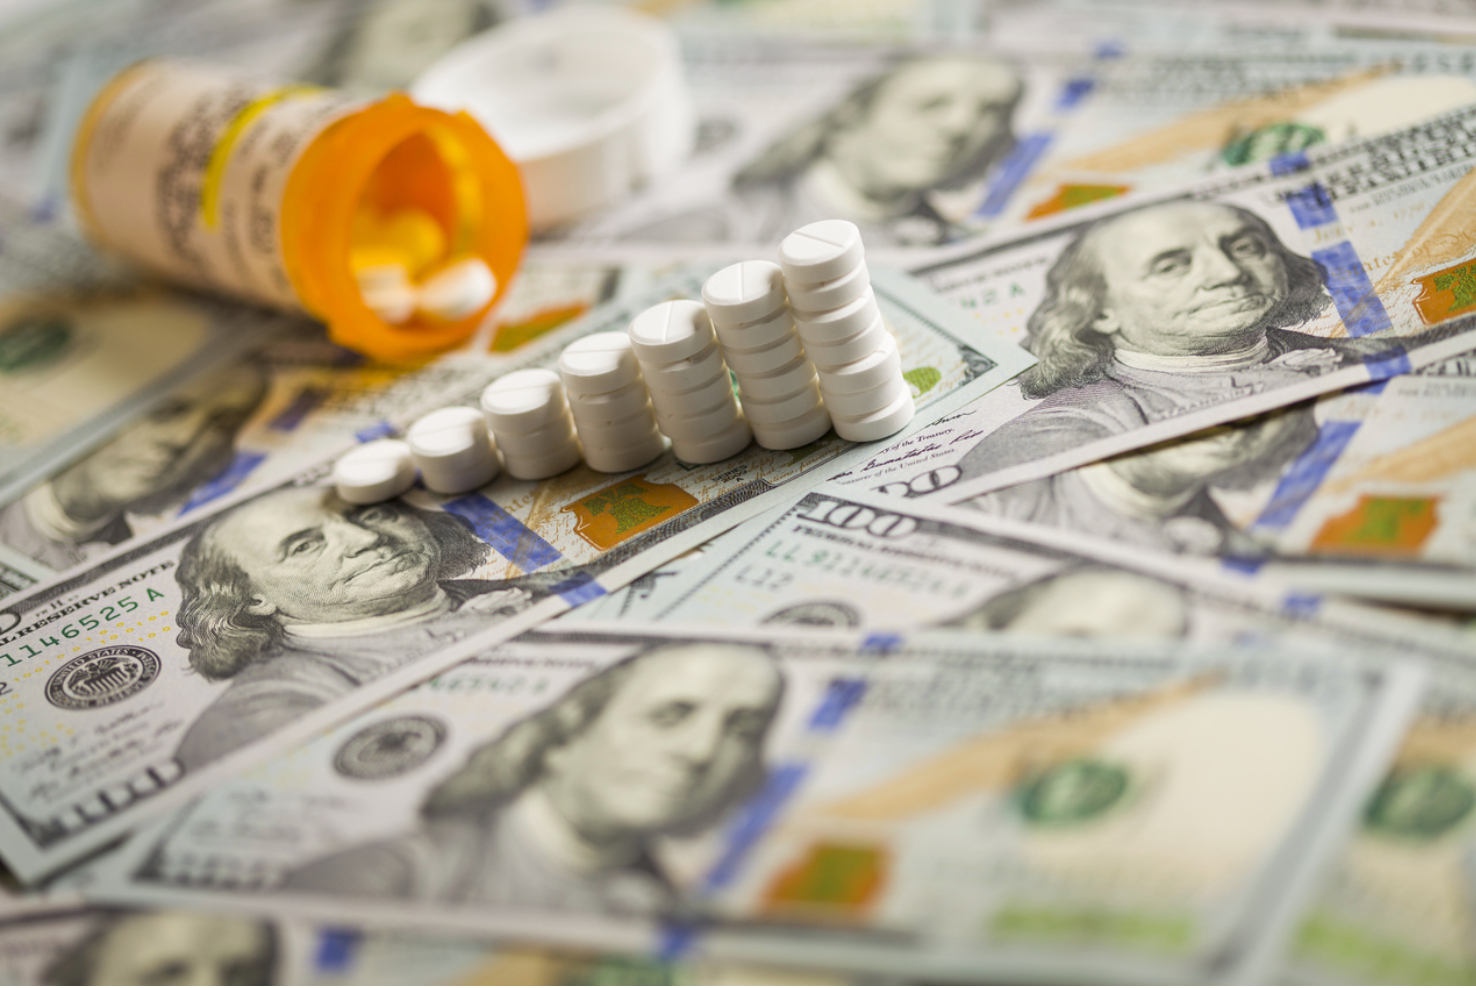 Solutions in the Search for Lower-Cost, Smart Pharmaceuticals